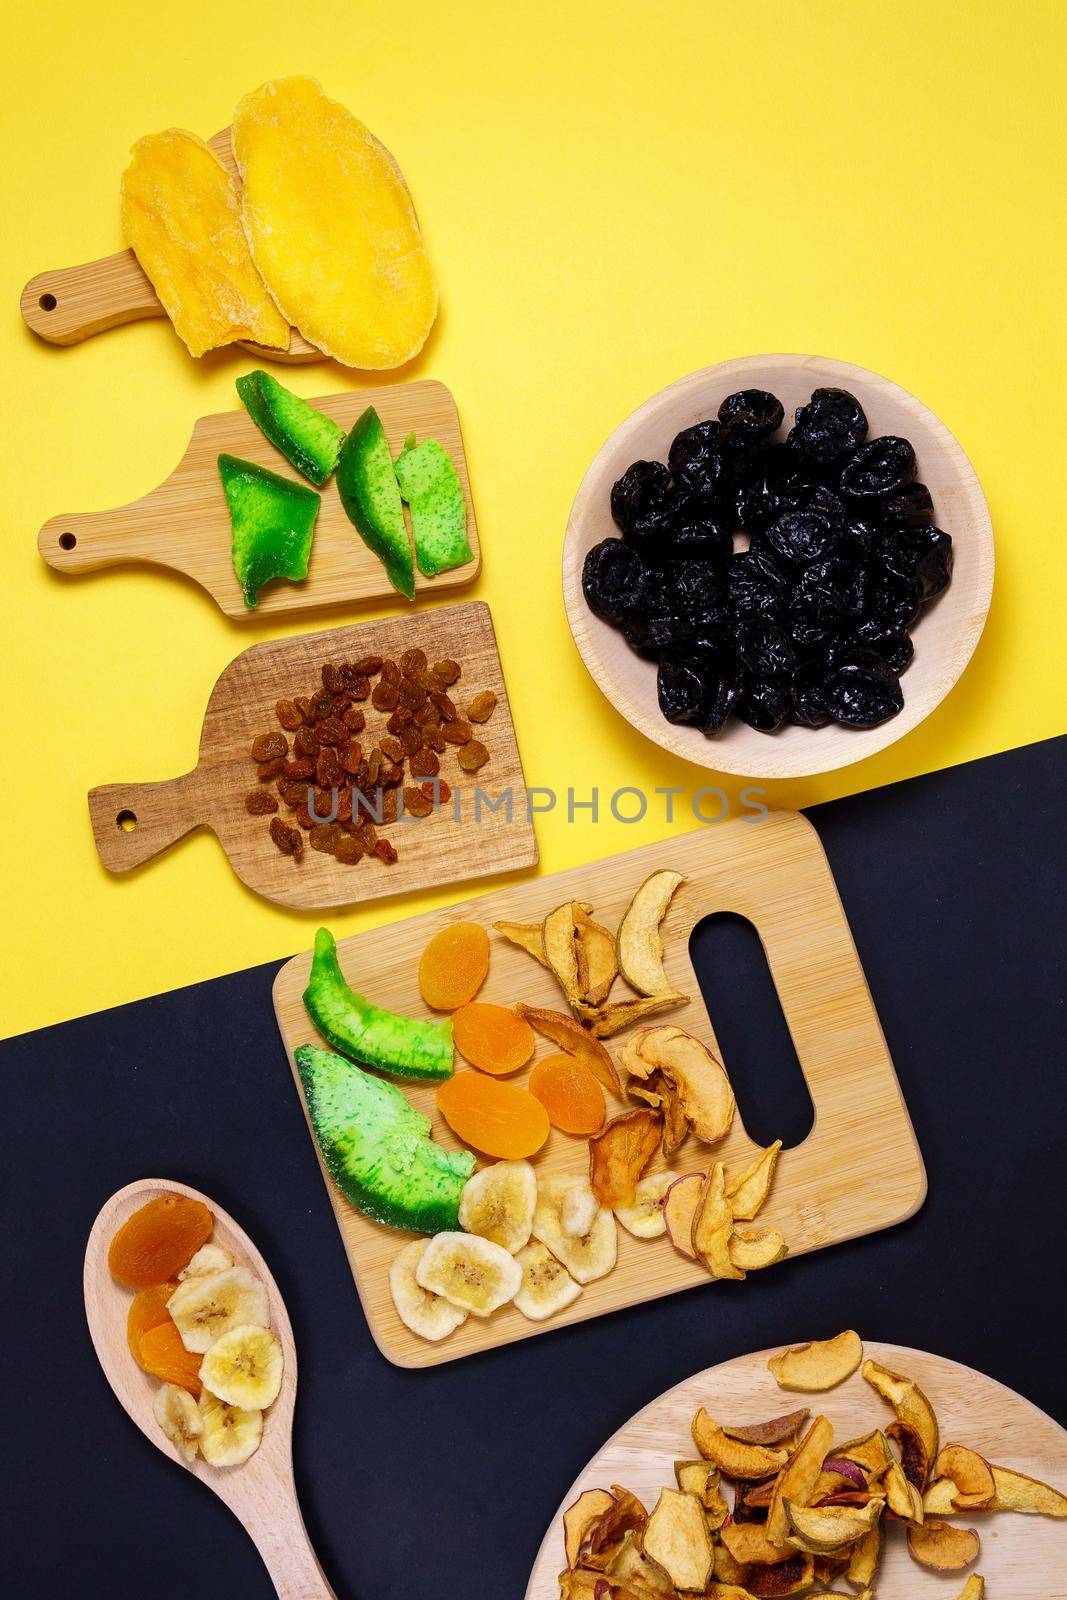 Mixture of dried fruits. Symbols of the Jewish holiday Tu Bishvat. Thanksgiving Day. Flat lay, top view by darksoul72